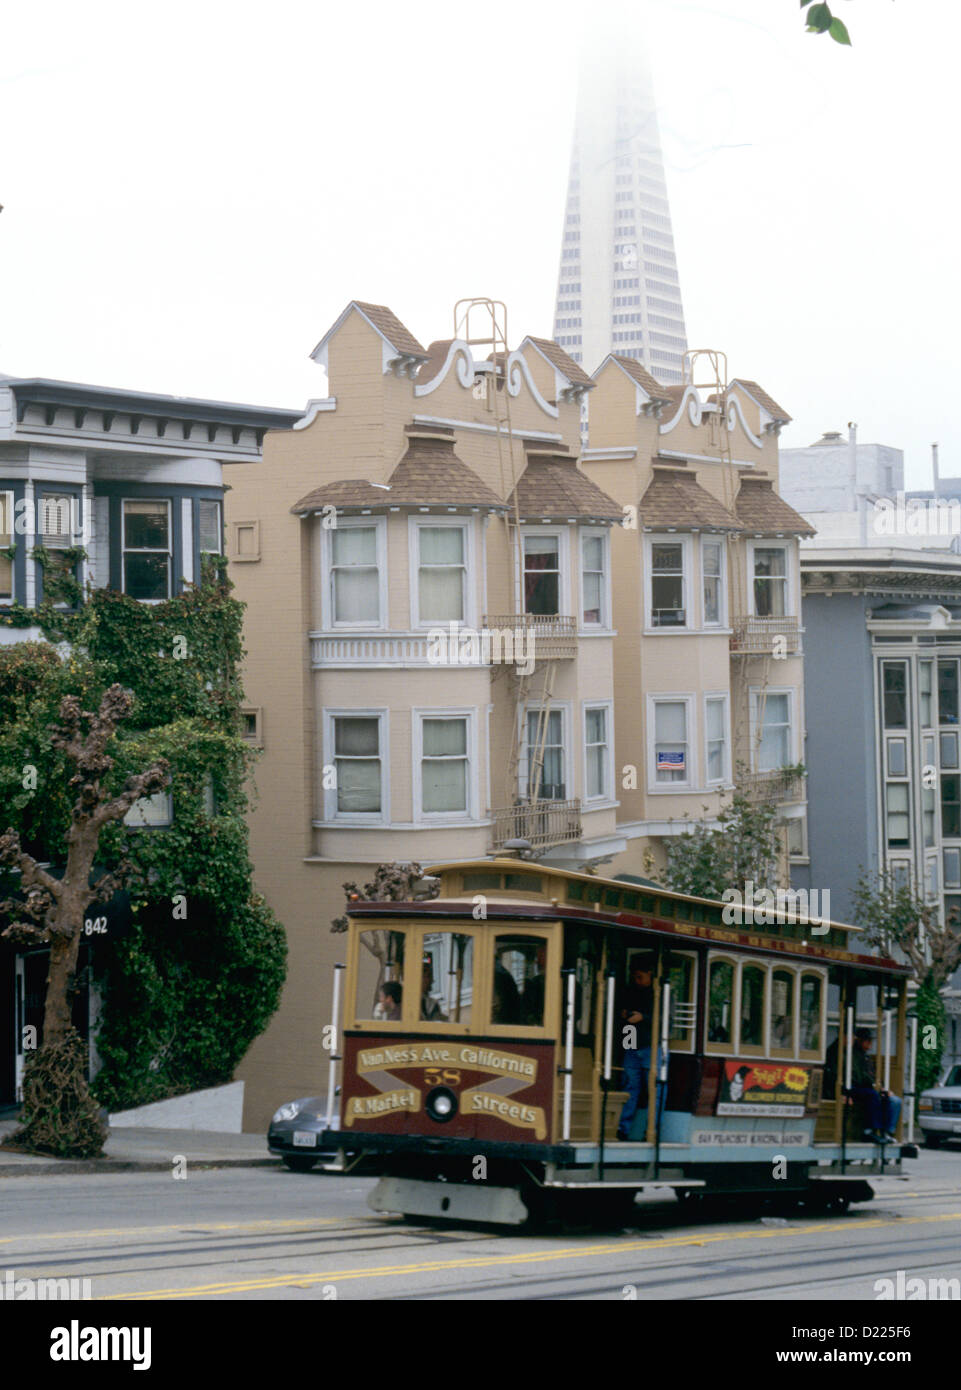 california street cable car heads up California street with transamerica pyramid in background Stock Photo